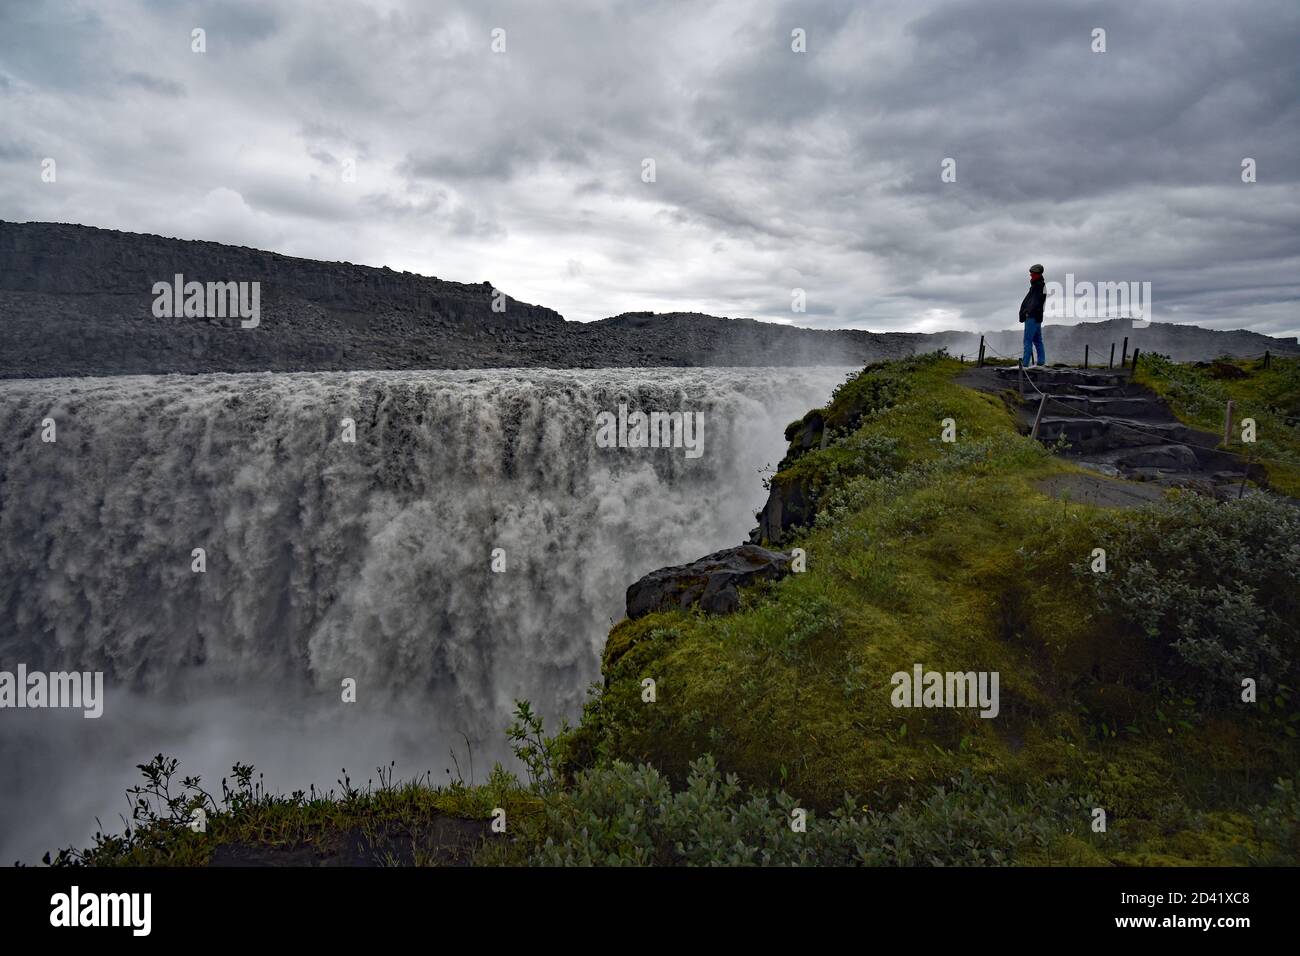 A male wearing a hooded coat standing on stone steps near the edge of Dettifoss Waterfall in Northeast Iceland as it plunges into the canyon below. Stock Photo